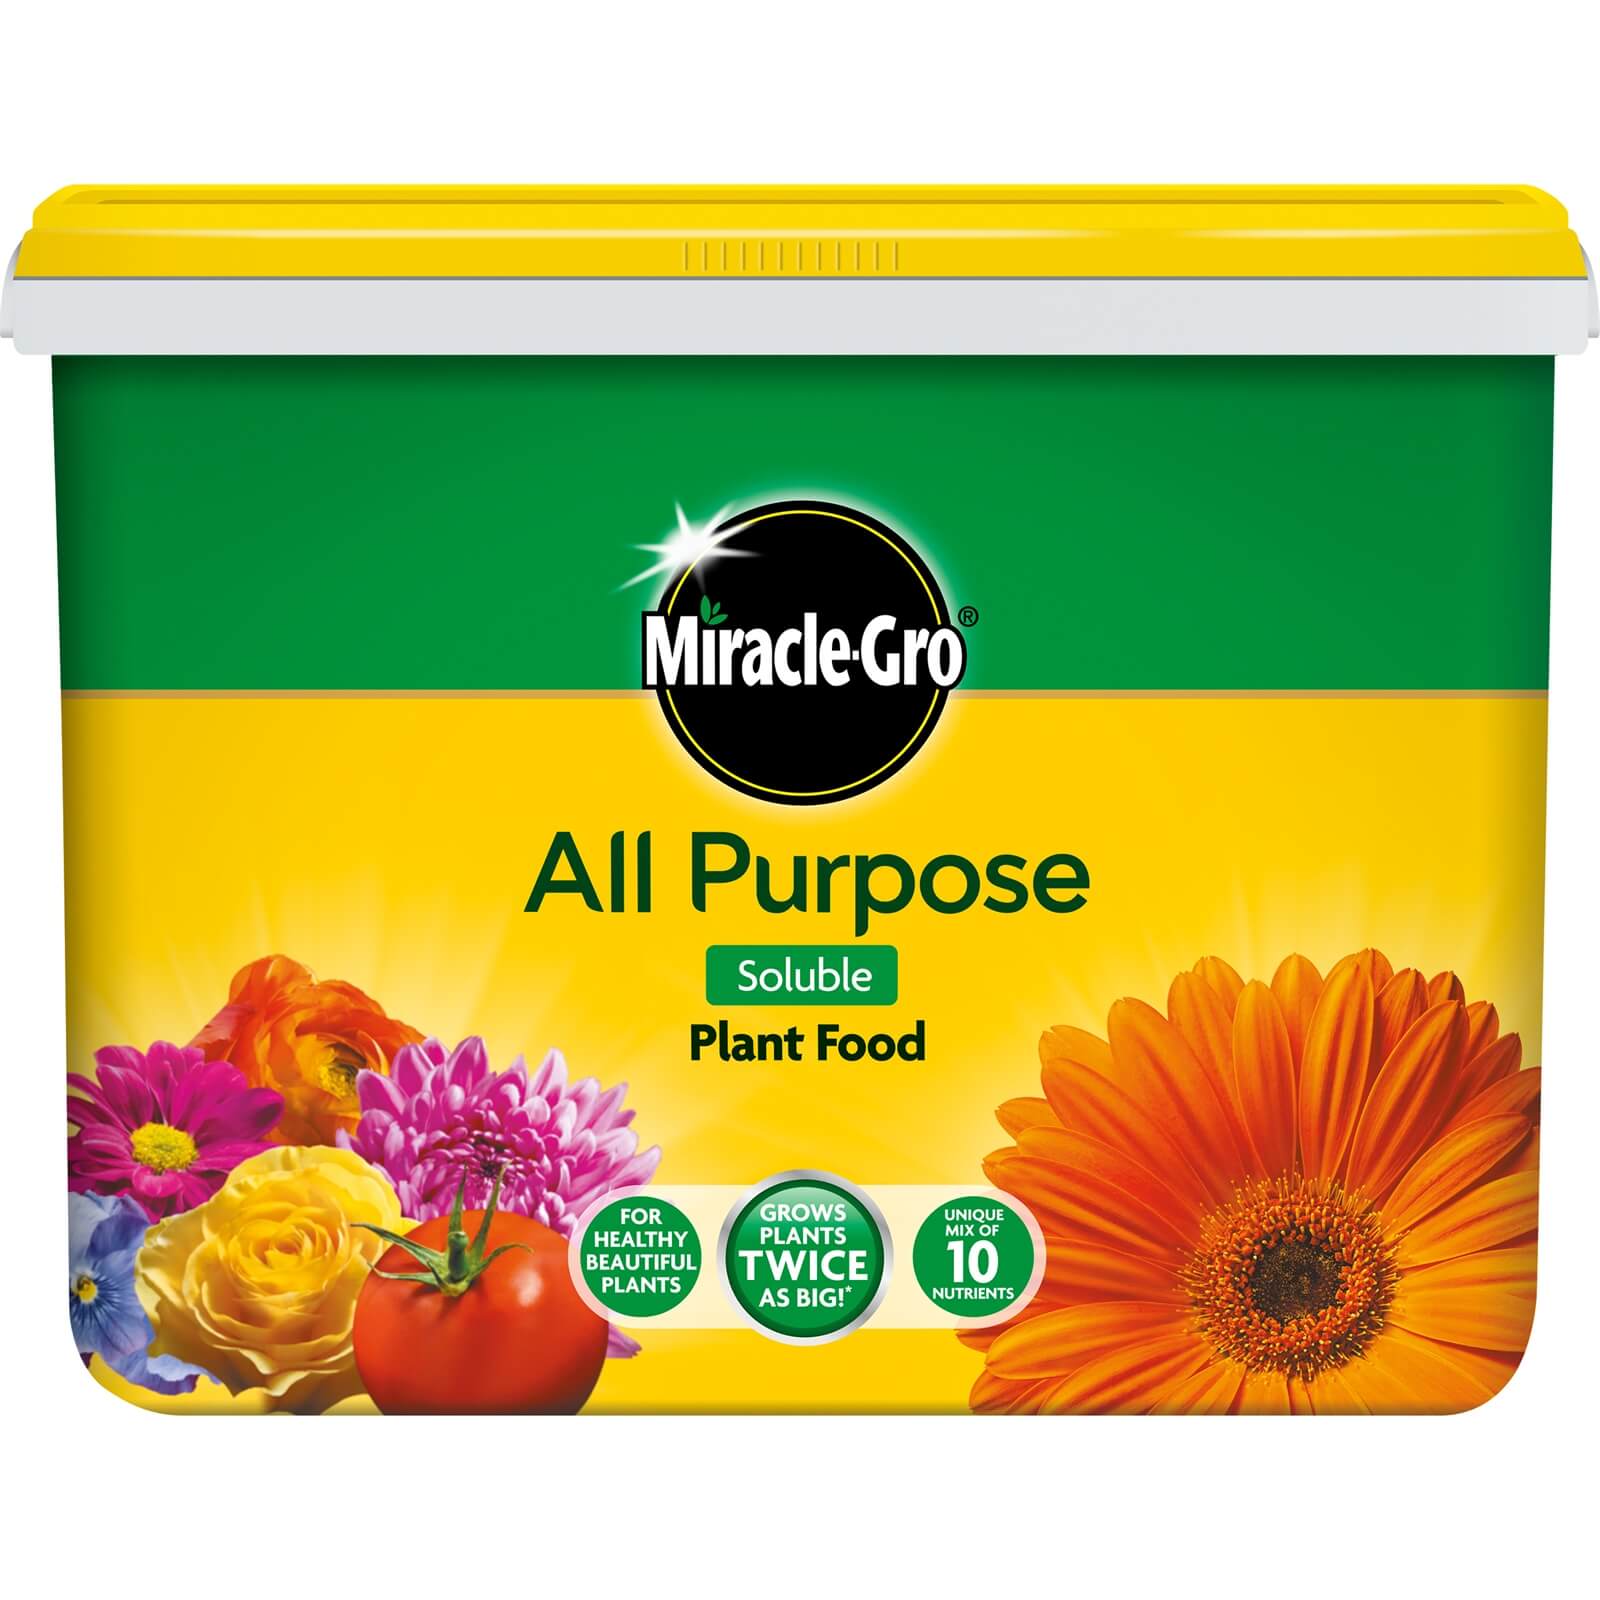 Miracle-Gro All Purpose Soluble Plant Food - 2kg